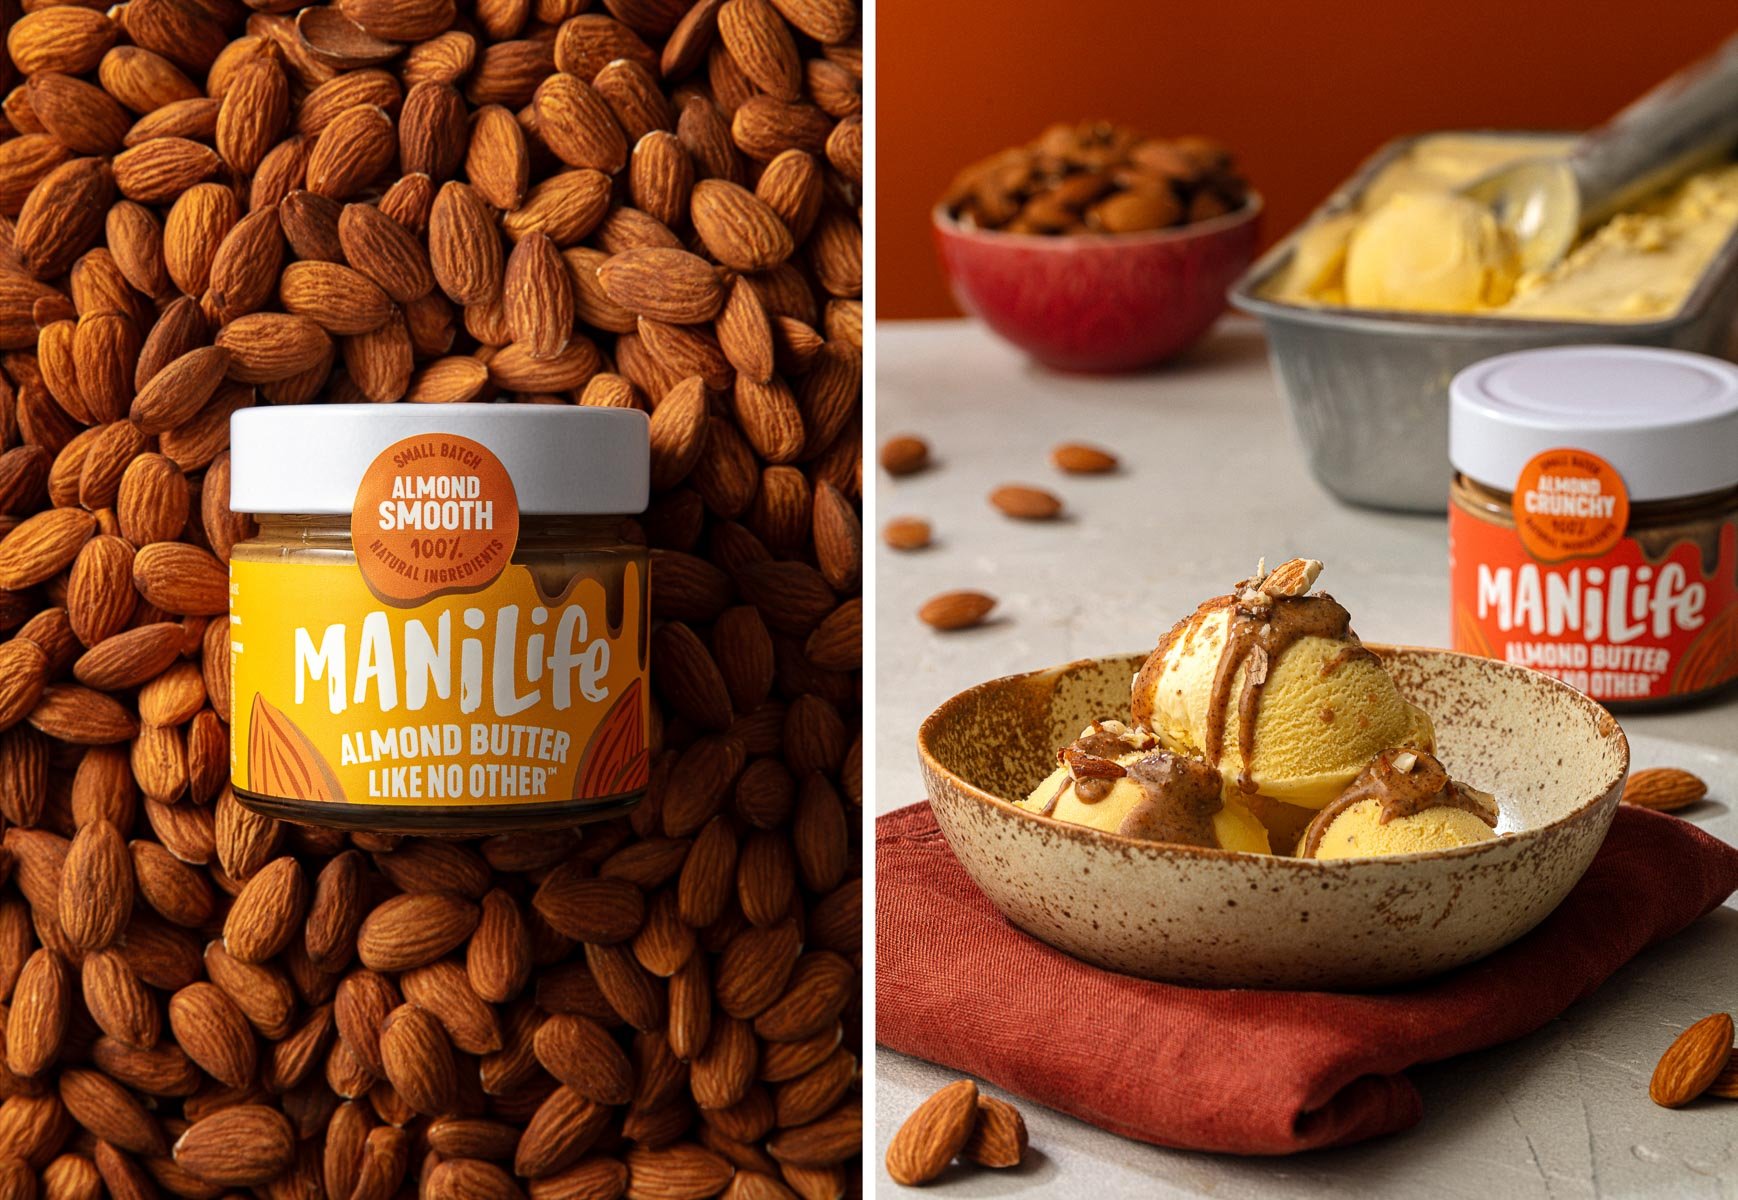 Hikaru Funnell Photography - Food Photography - ManiLife Almond Butter - 01-02-24 - 1.jpg